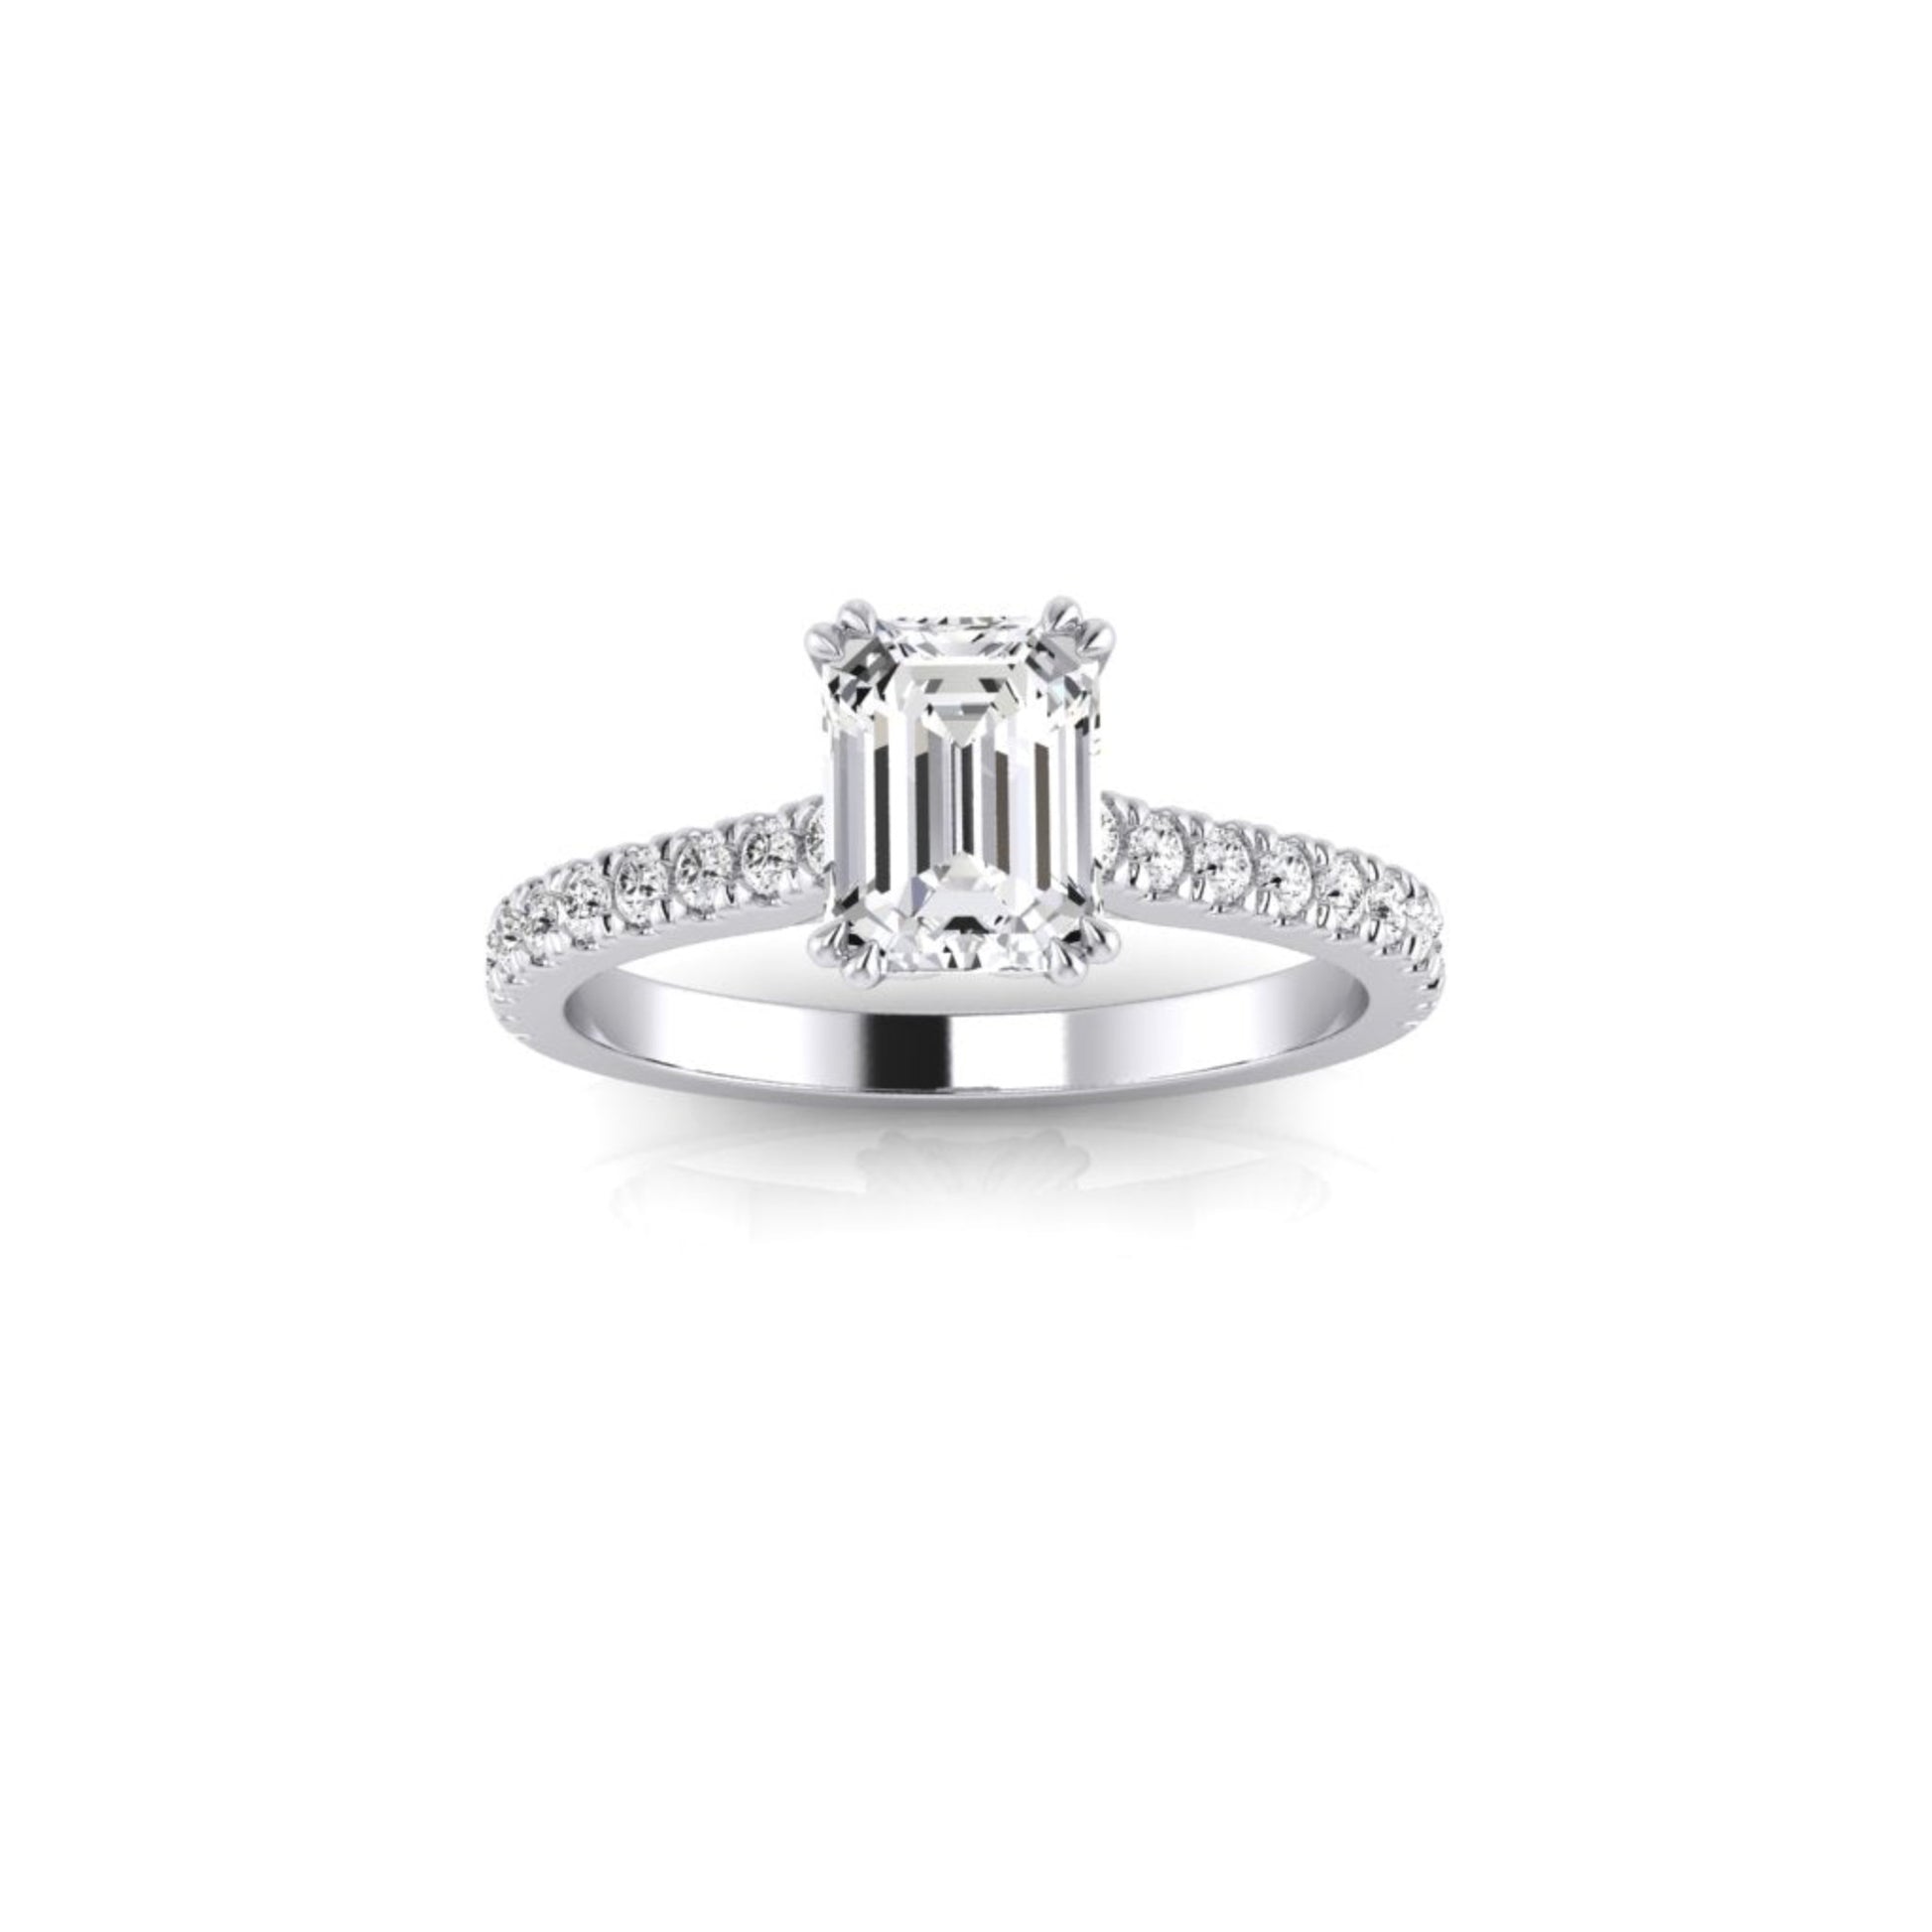 Taylor Emerald Diamond Solitaire 4 Claw Ring